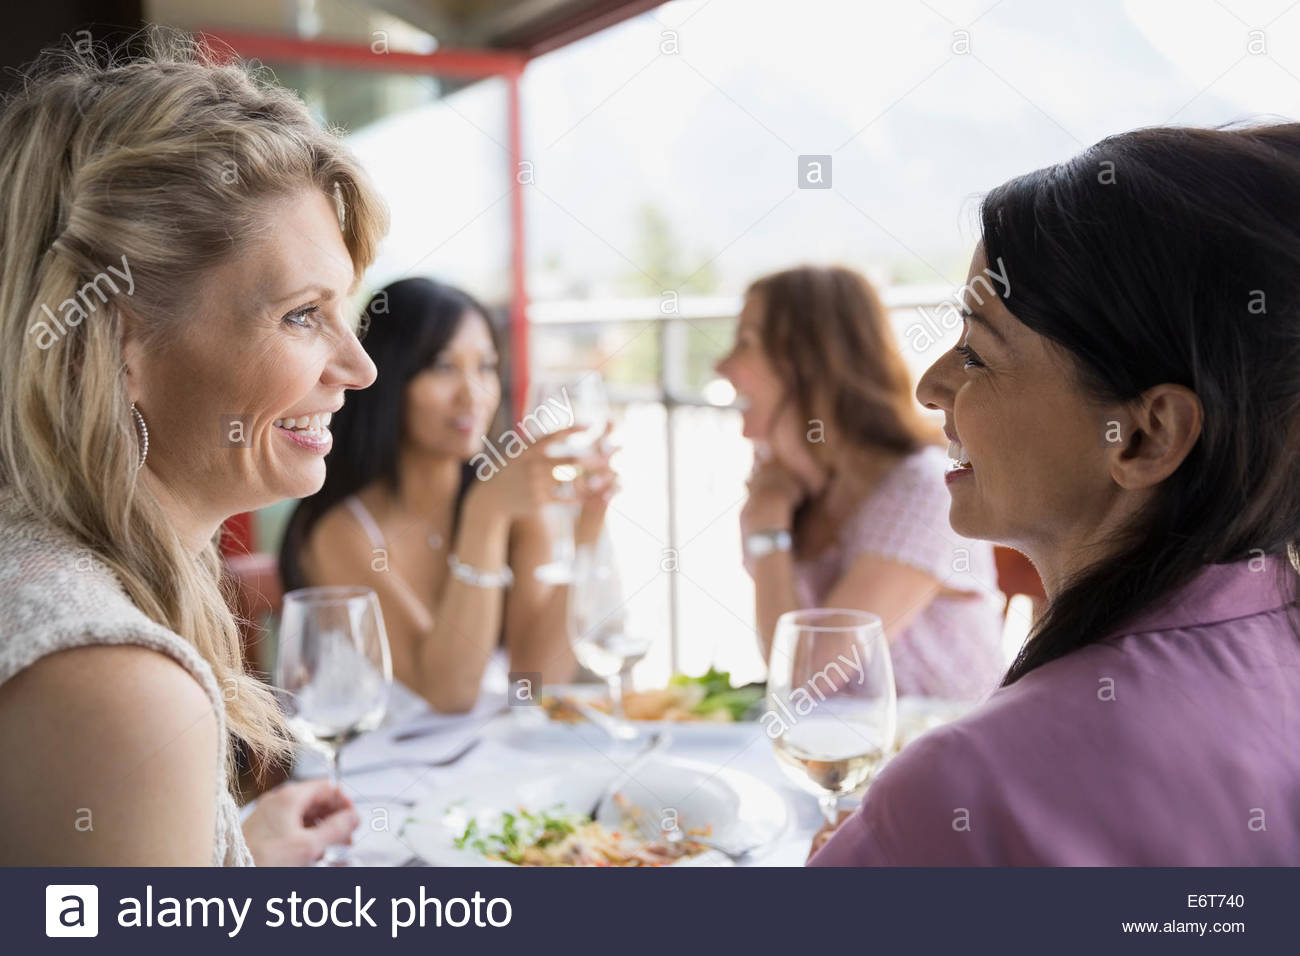 Women eating together in restaurant Stock Photo